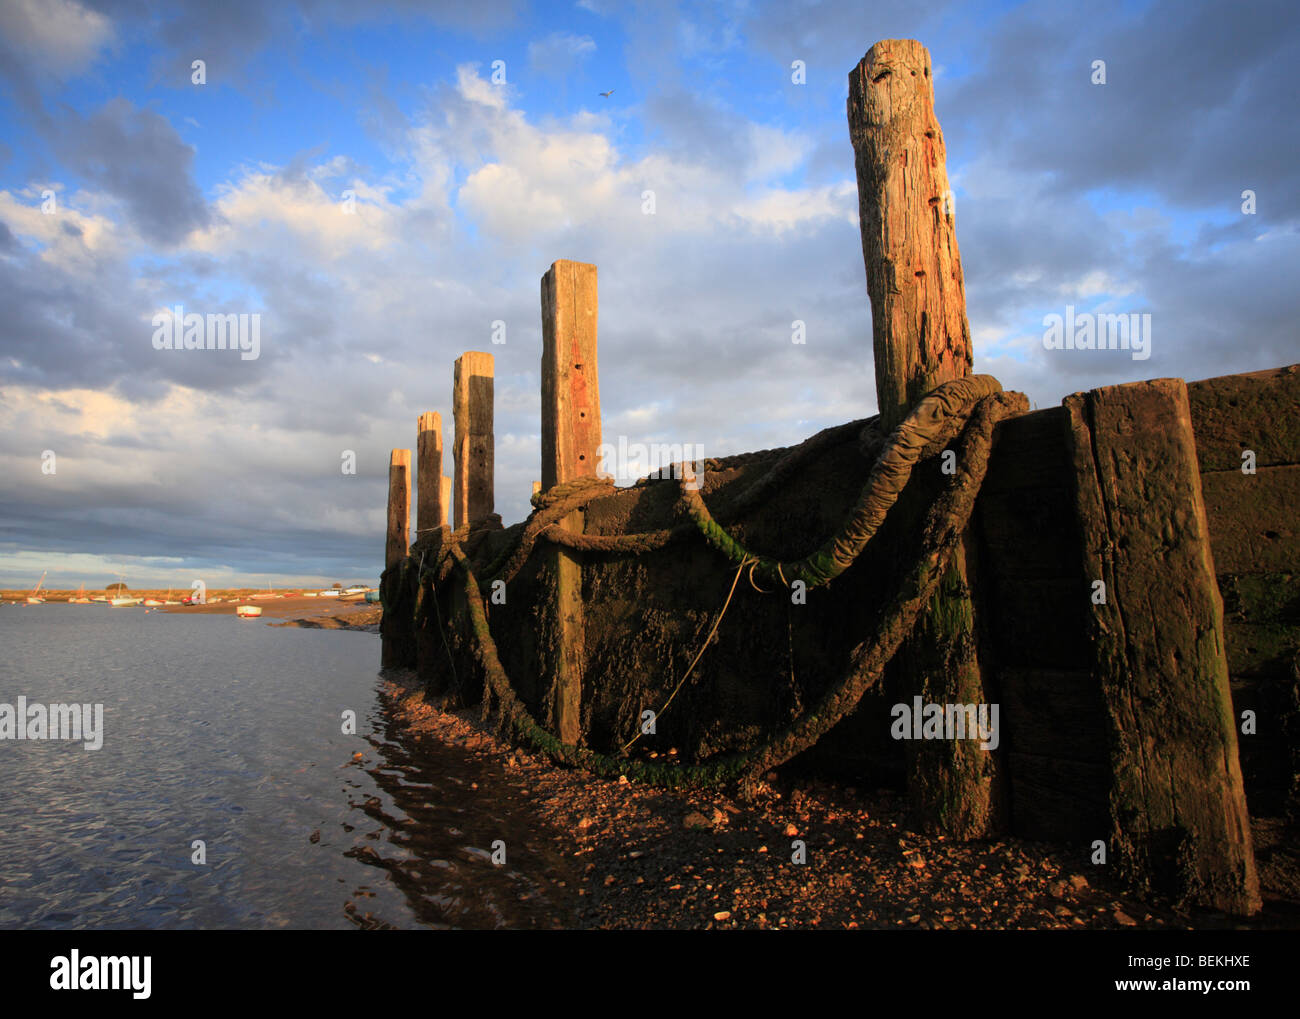 Mooring posts at the harbour of Burnham Overy Staithe on the North Norfolk coast, England, UK. Stock Photo